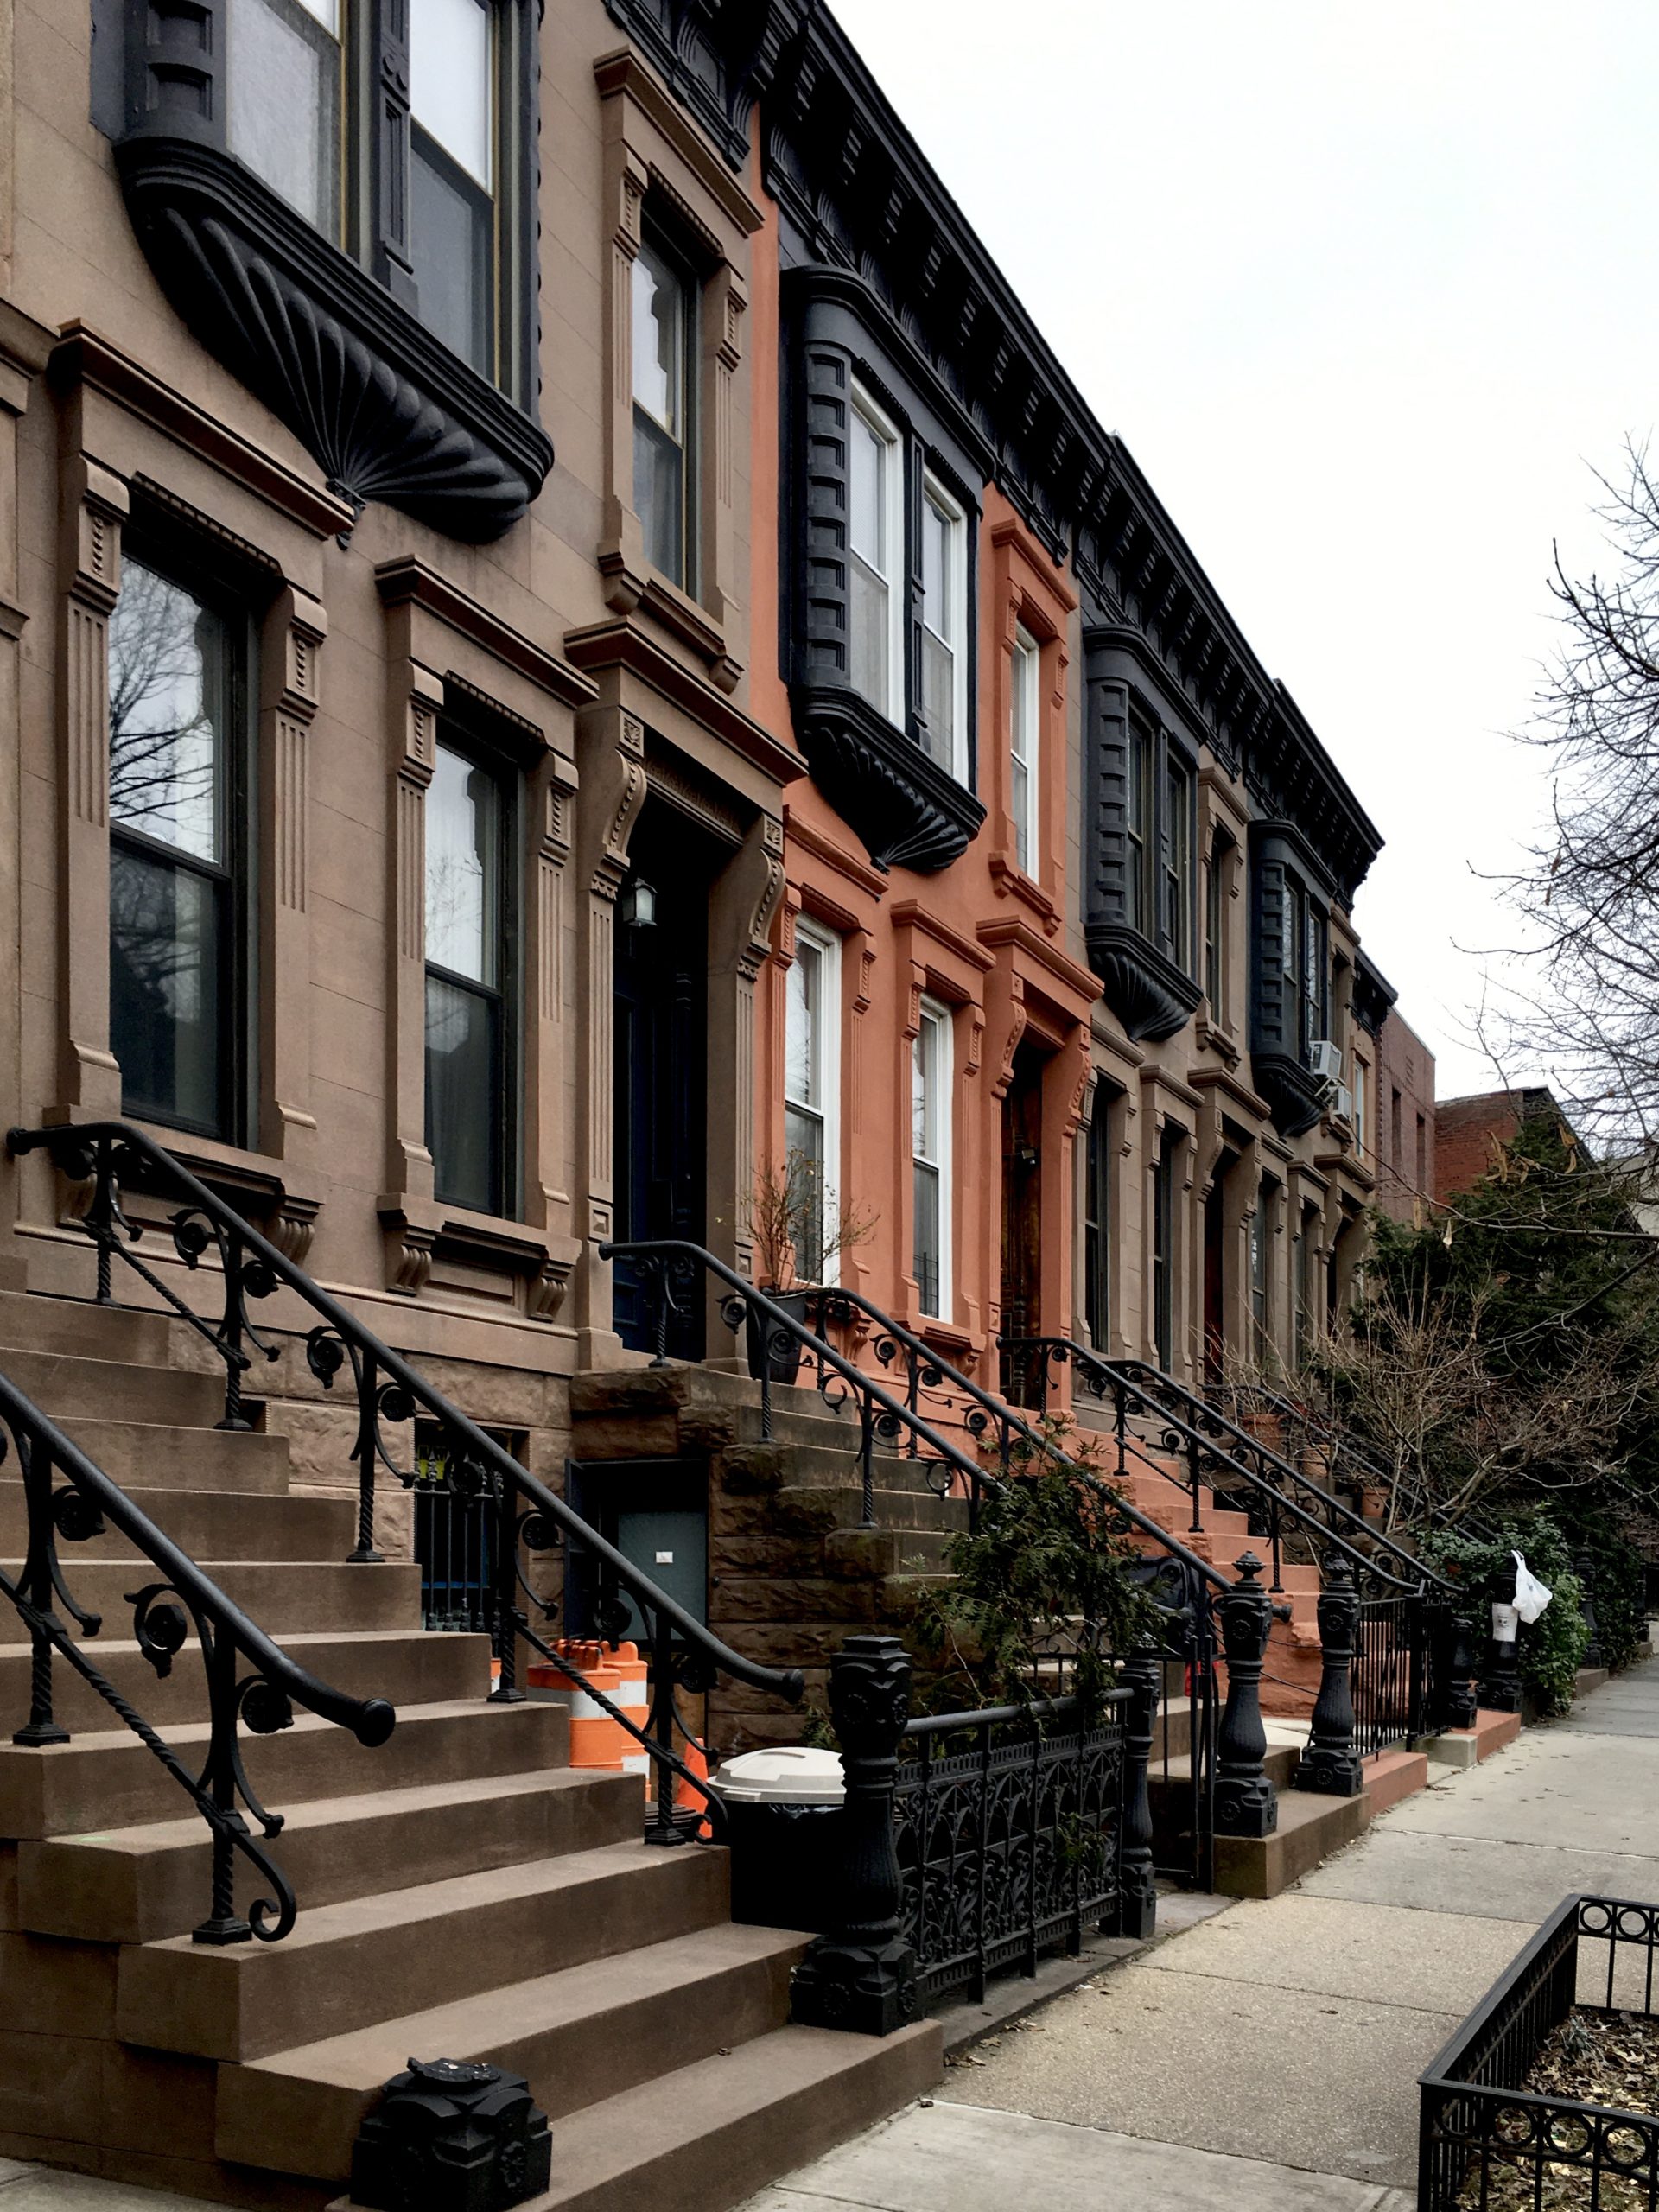 The protruding upstairs windows add a touch of novelty to brownstones from 673 President St. (at left) to 679 President St. (at right). Photo: Lore Croghan/Brooklyn Eagle